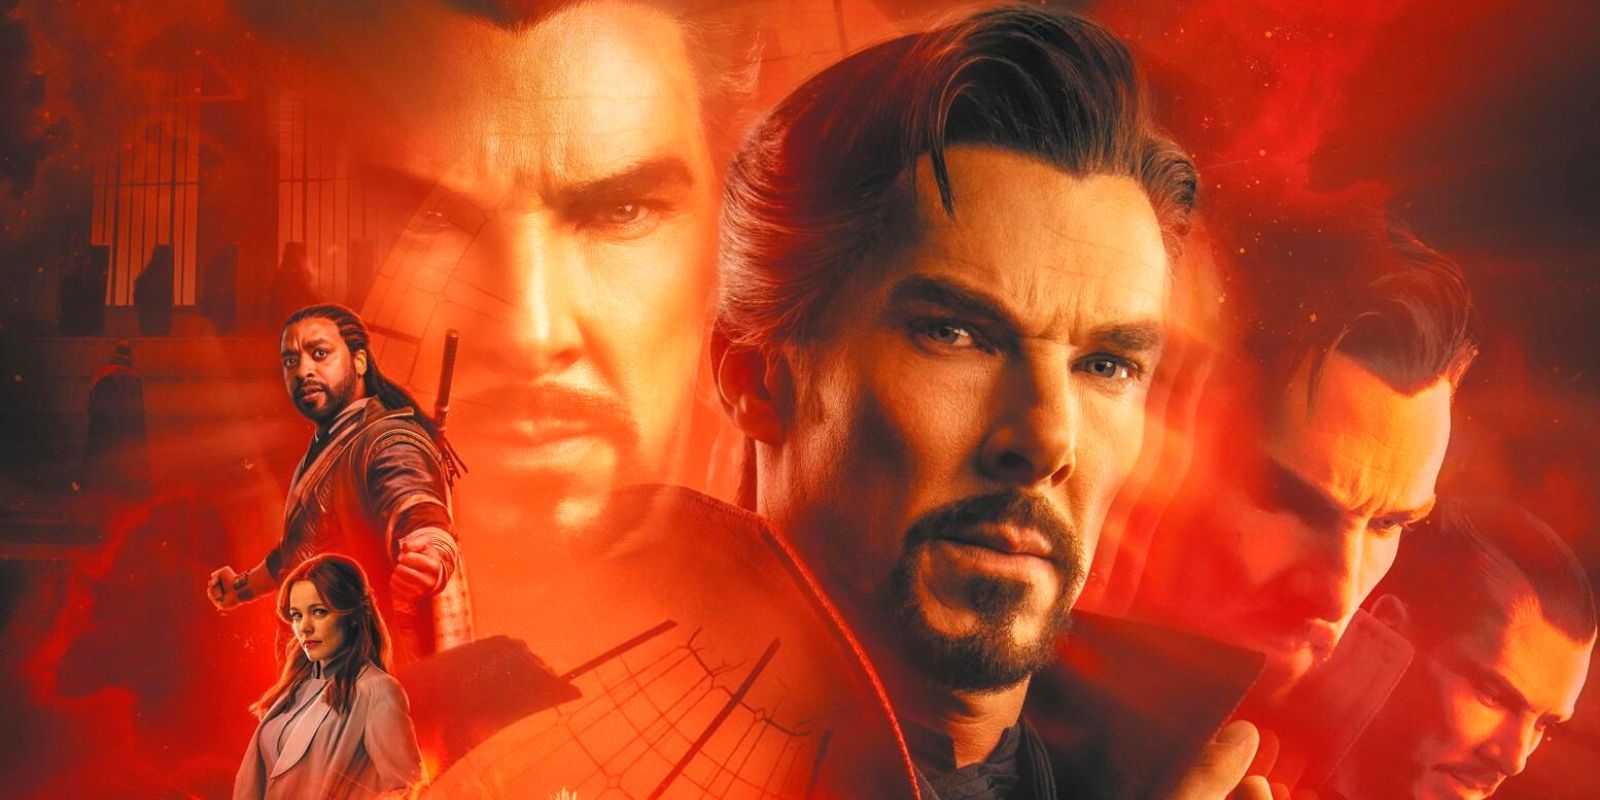 Doctor Strange 3 Release Date Rumors: When is it Coming Out?